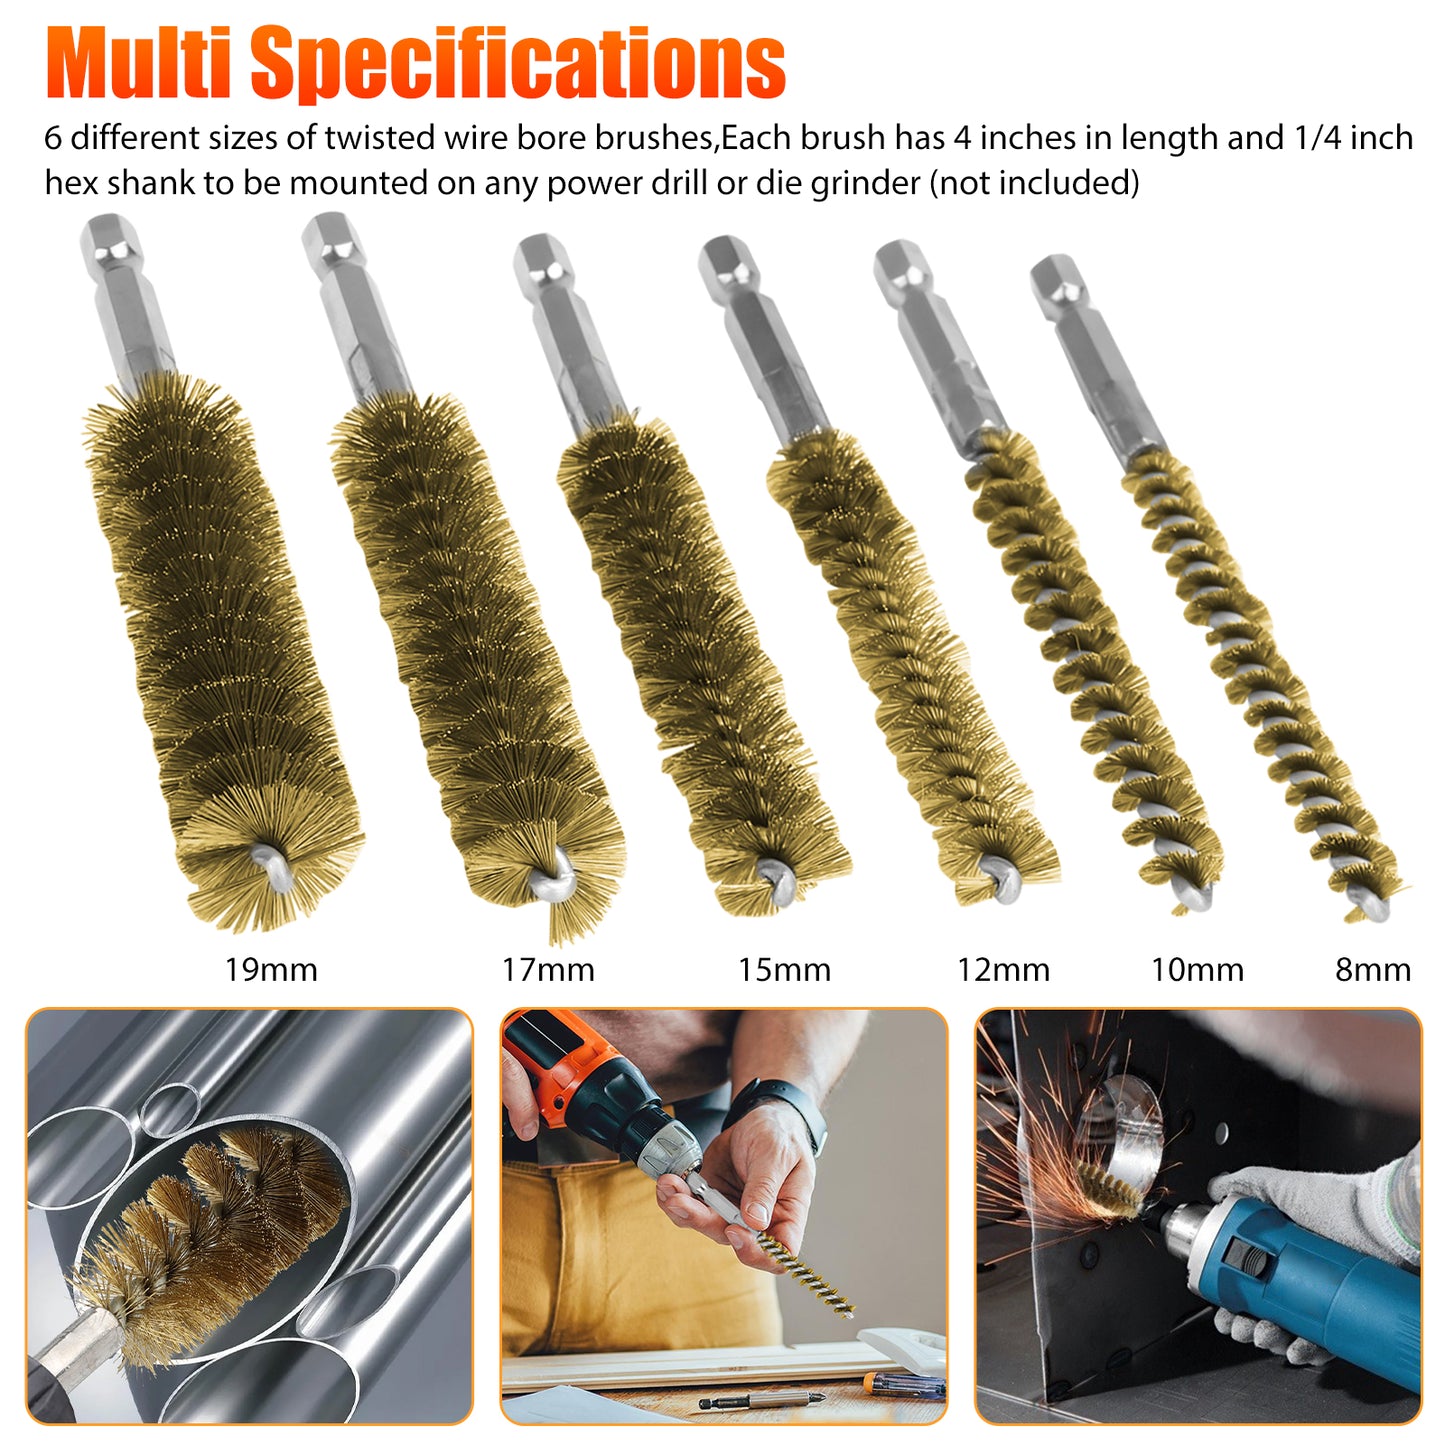 High-Quality Brass Bore Cleaning Brushes - Set of 6 Wire Brushes for Cleaning, Polishing, and Rust Removal